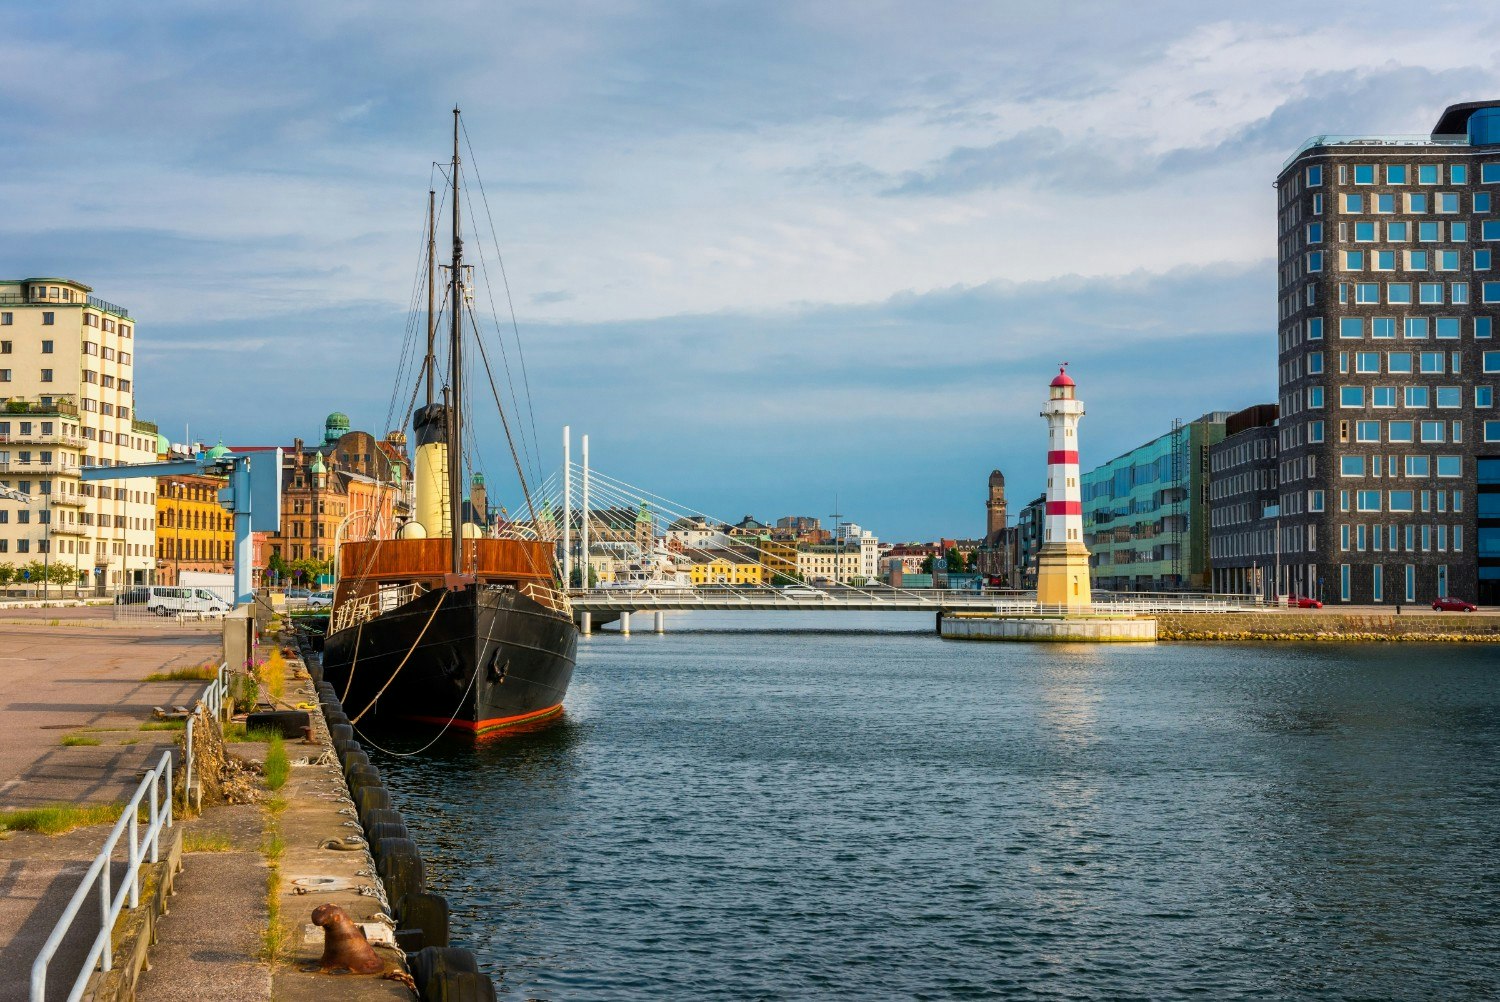 The Malmo Harbor with a lighthouse and bridge.